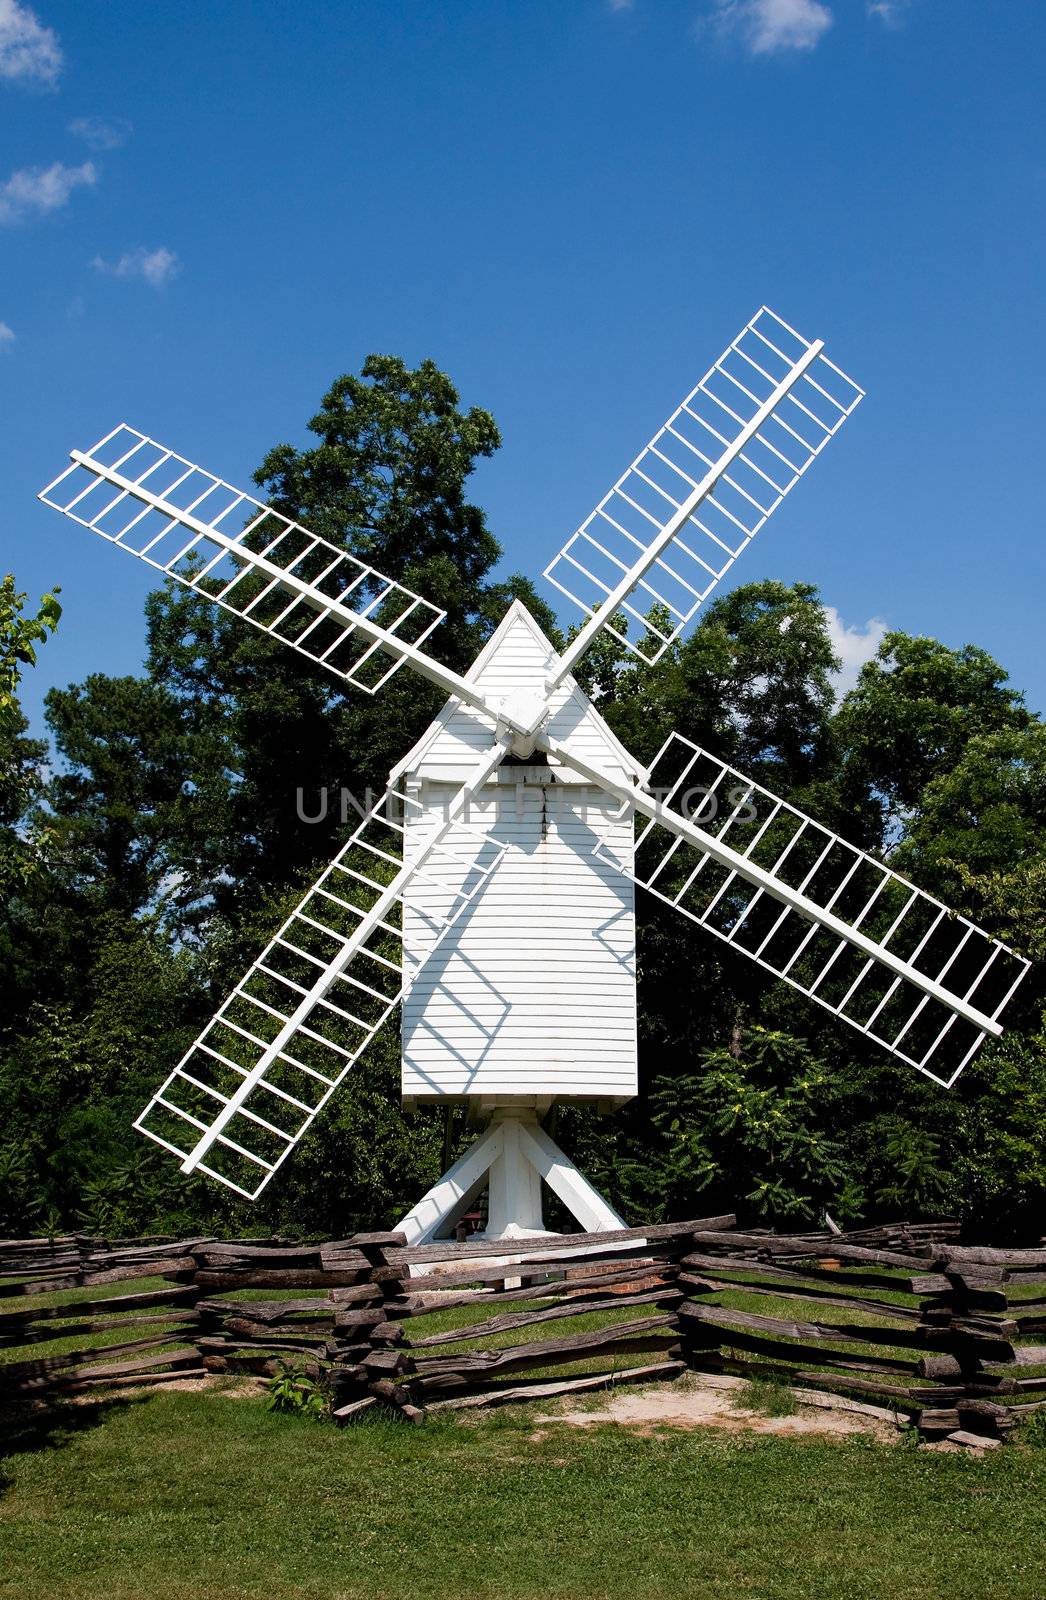 A white wooden windmill in a small meadow behind a wooden fence on a summer day with blue skies surrounded by trees.